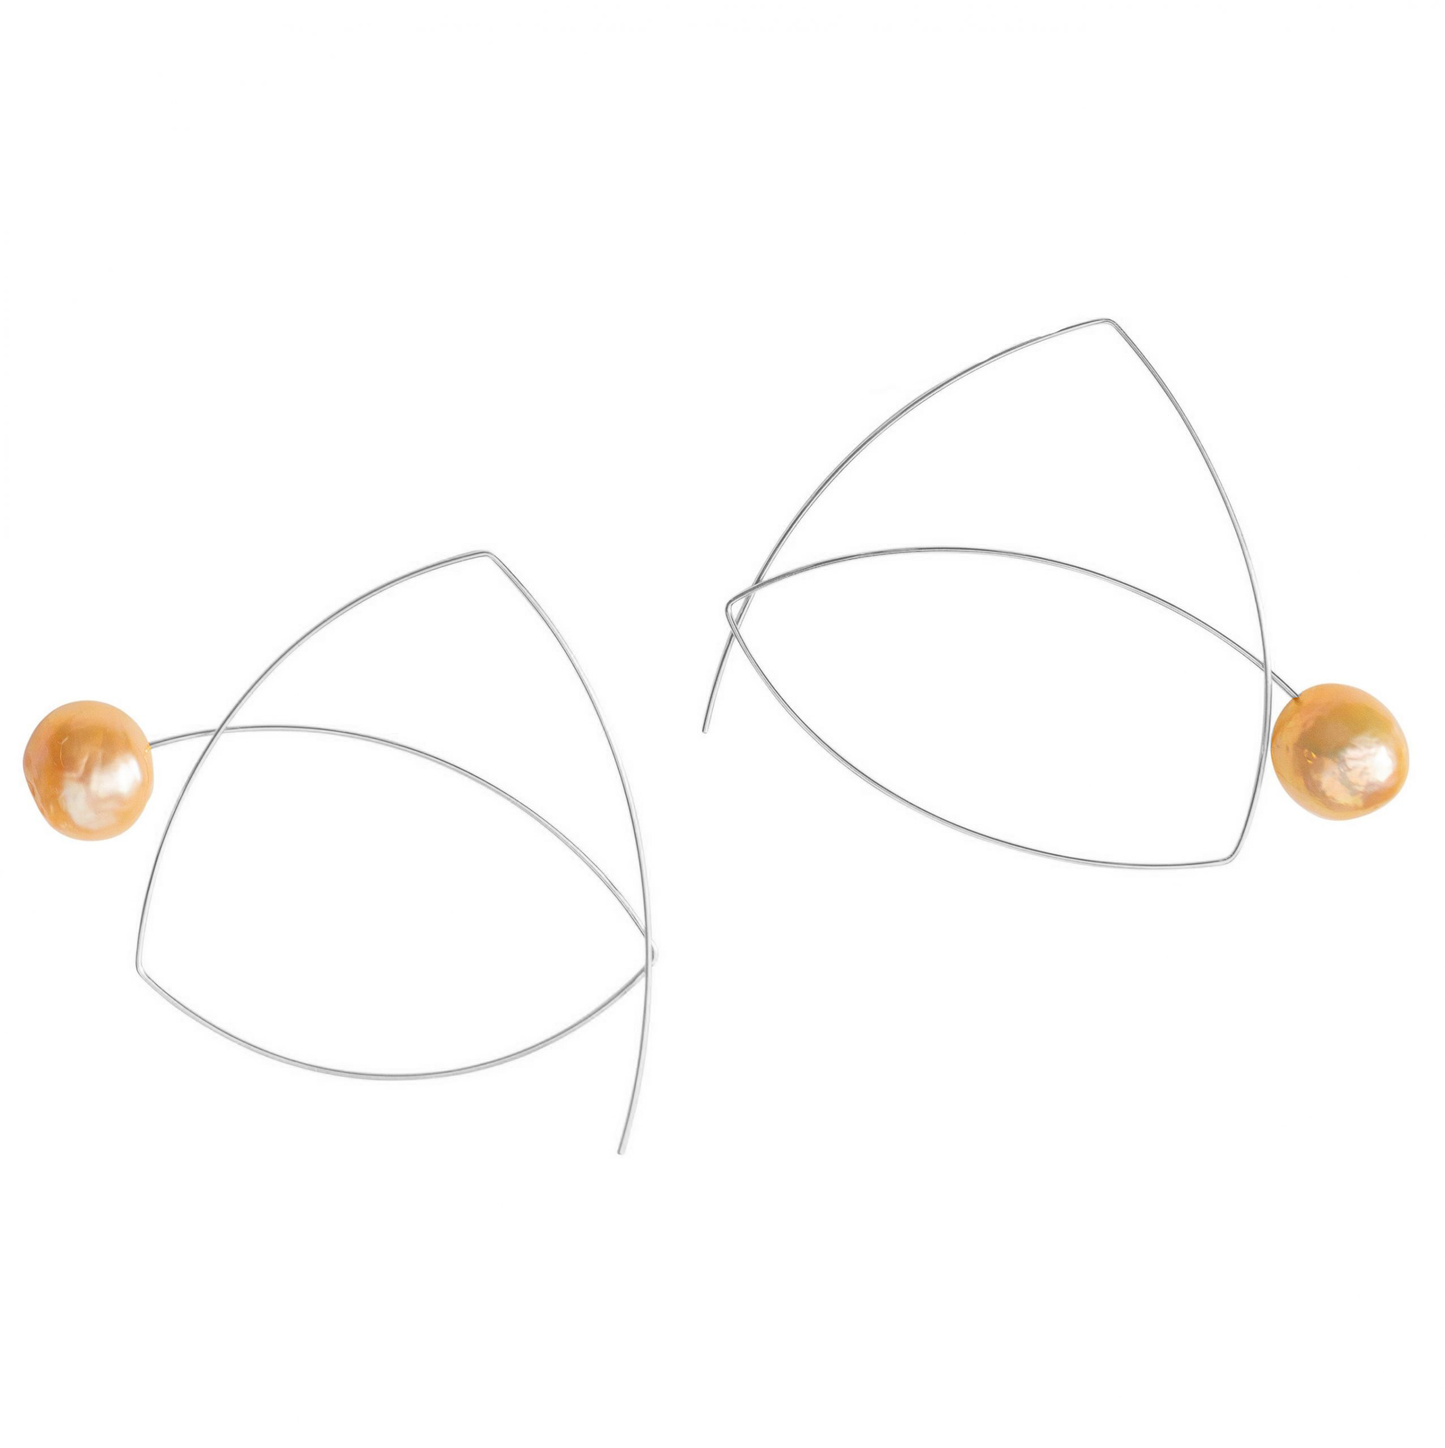 Pointed Triangle Large Earrings with Ripley Peach Freshwater Pearls